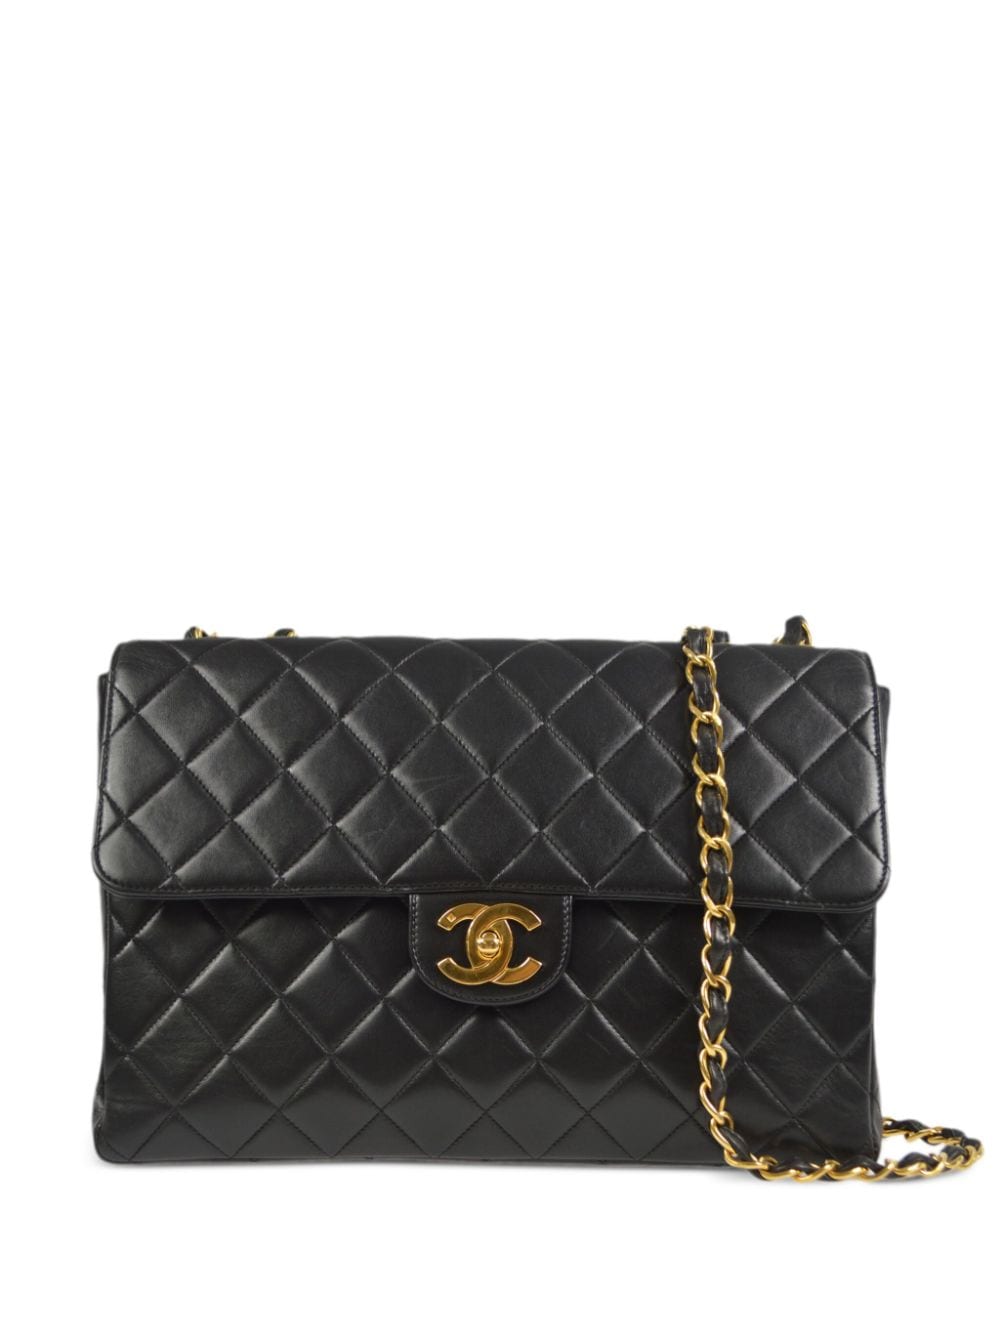 Pre-owned Chanel 1997 Jumbo Classic Flap Shoulder Bag In Black